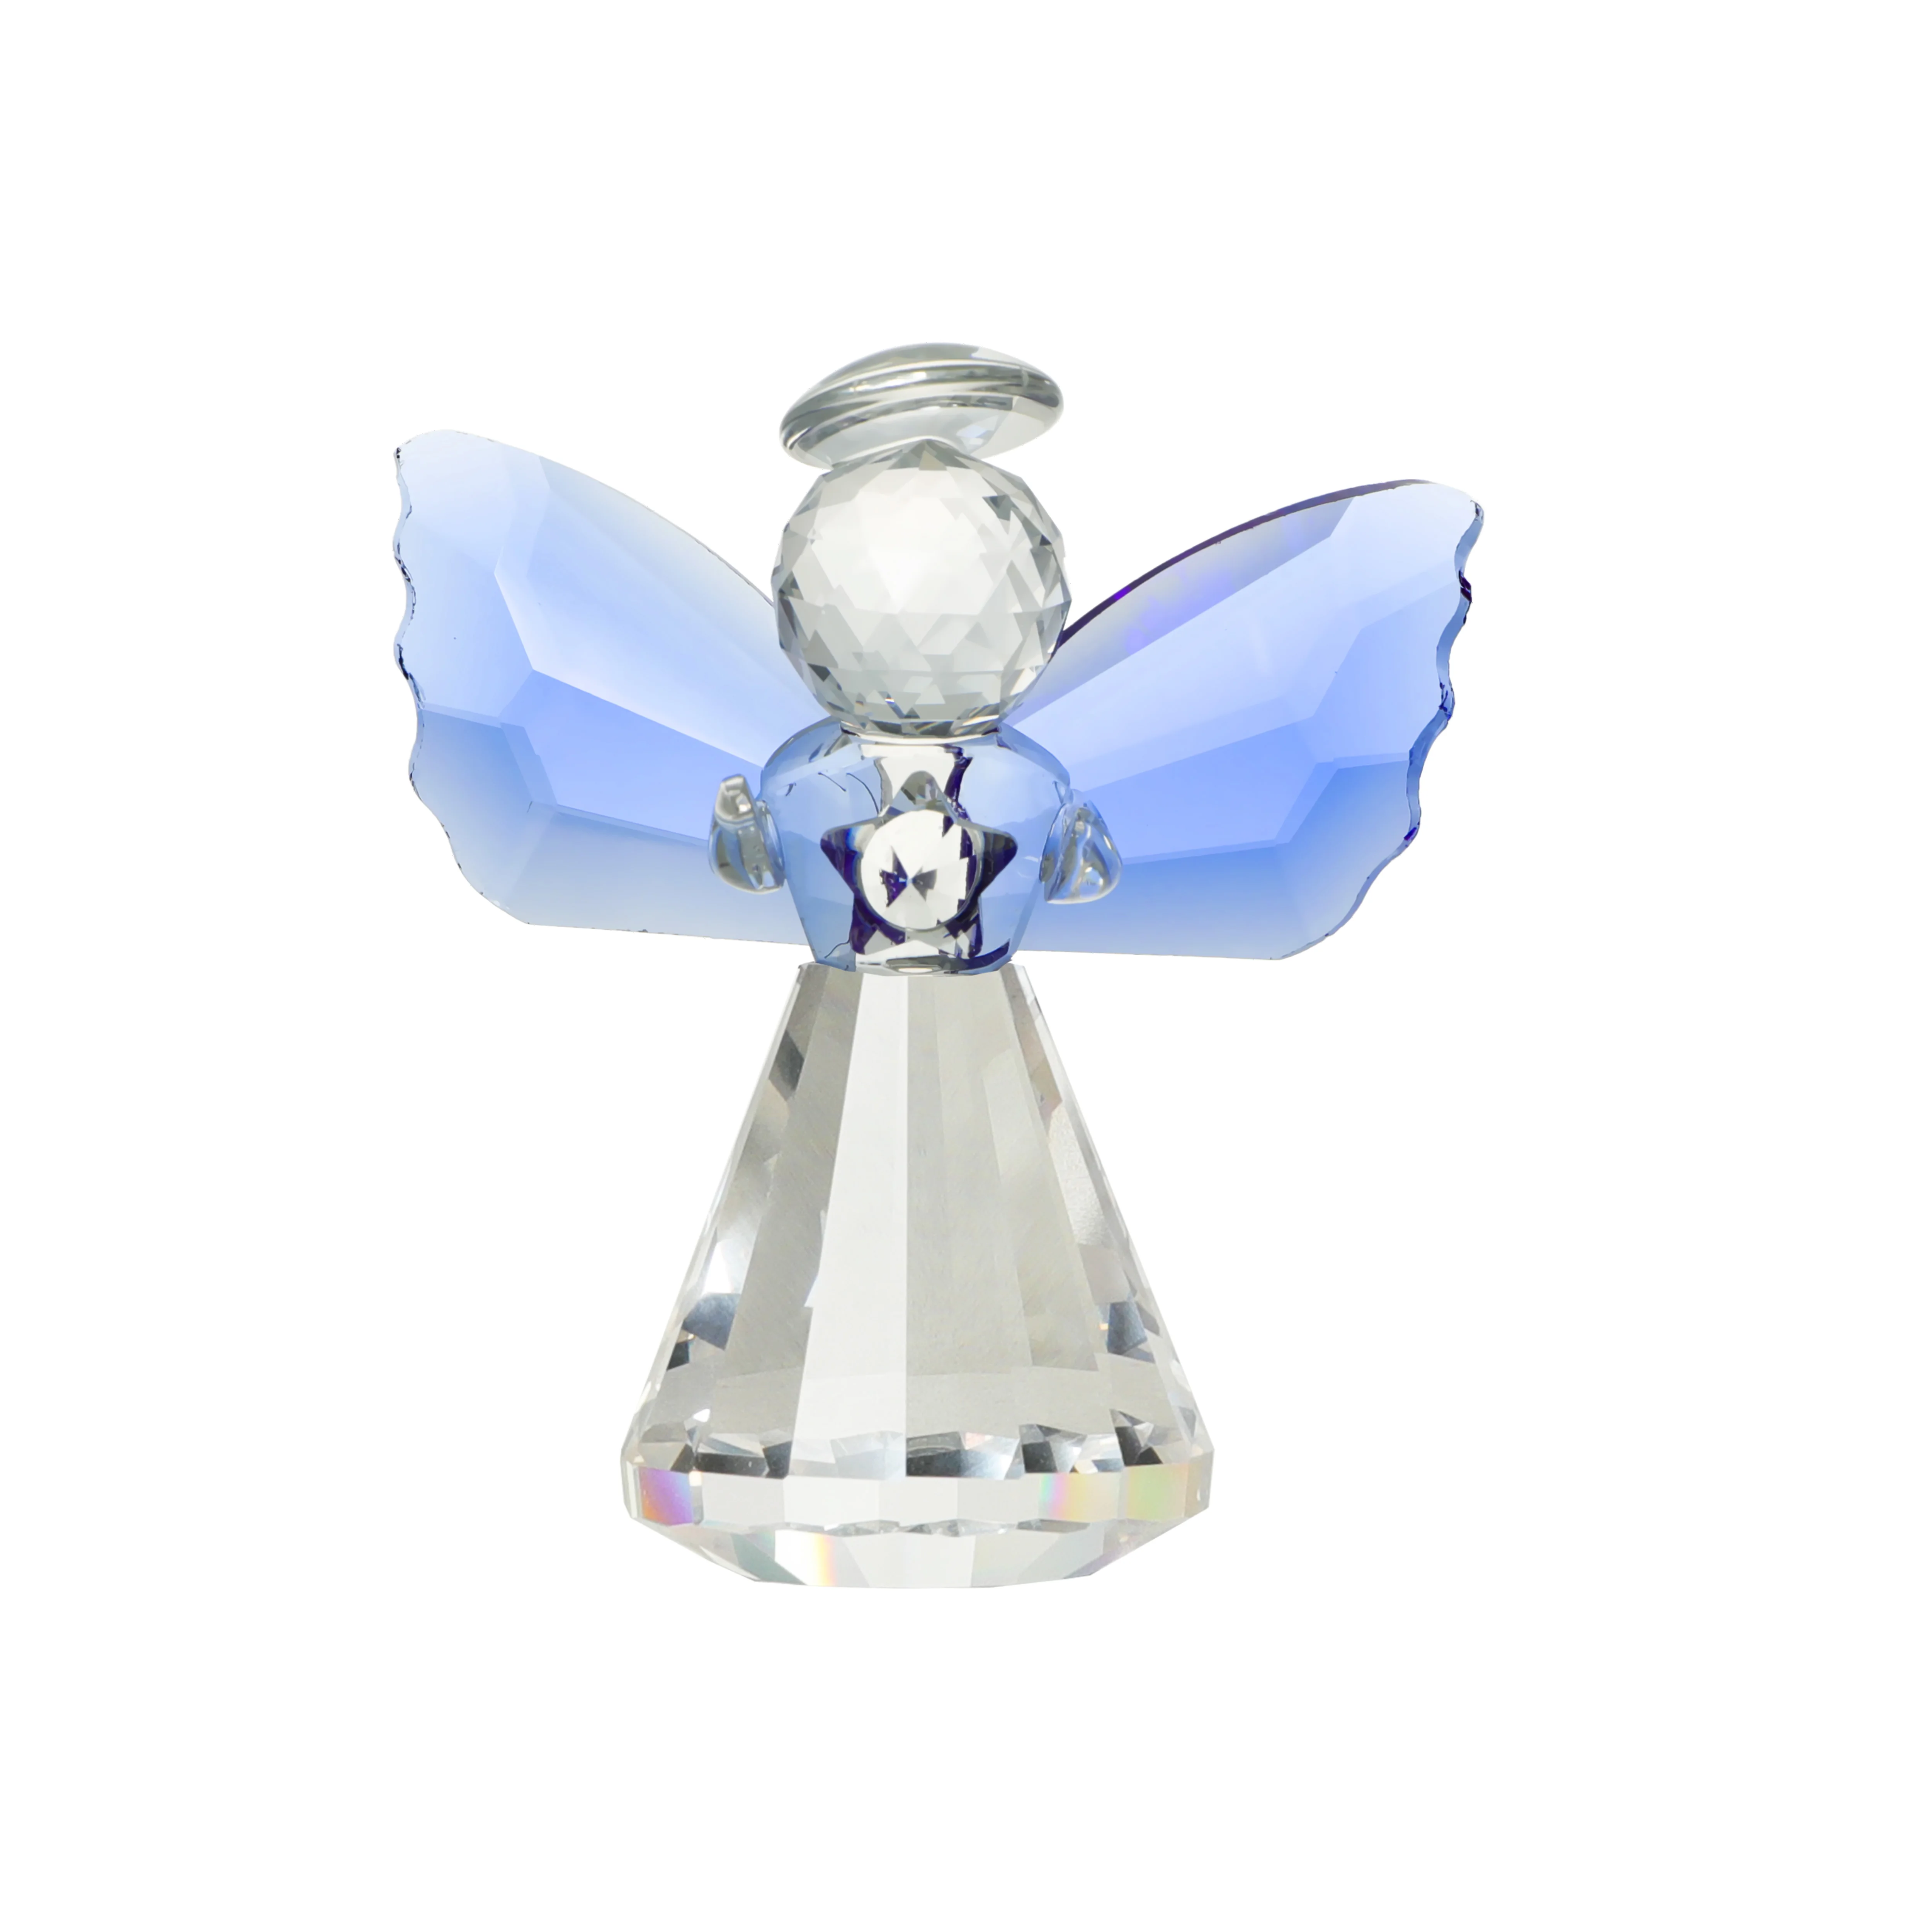 

Crystal Angel Figurine Paperweight Decor Glass Ornaments Art Home Table Decoration Collectible Gifts